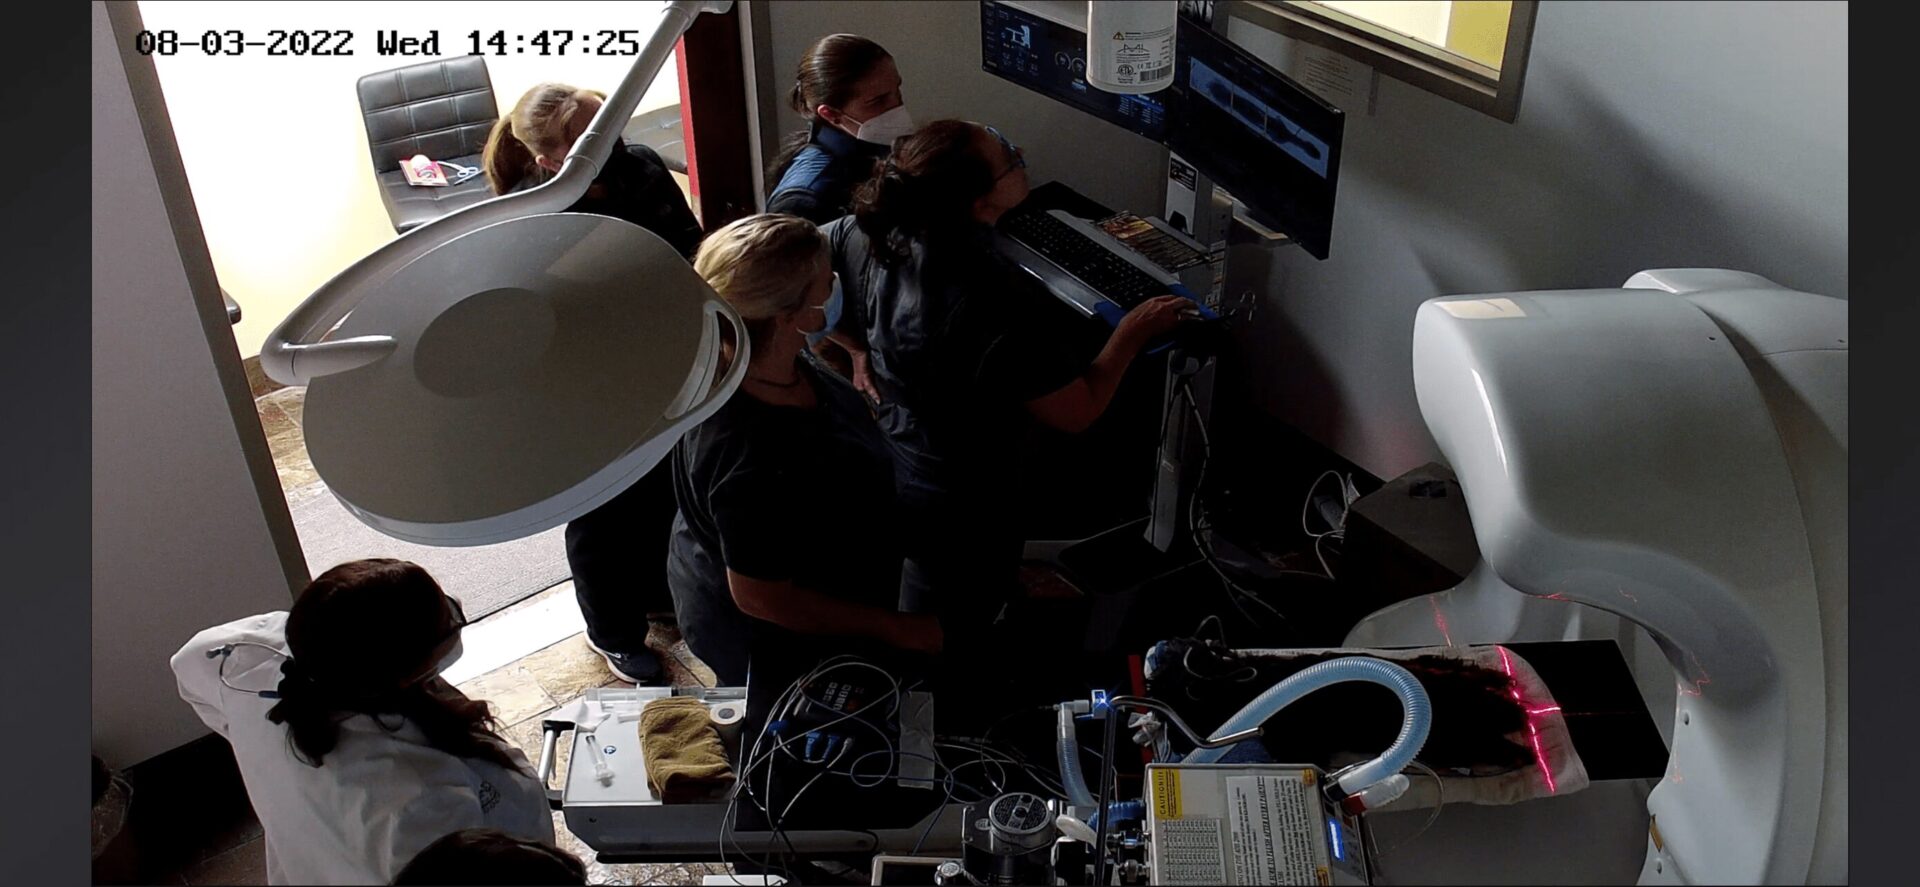 A picture of concerned nurses looking at the screen